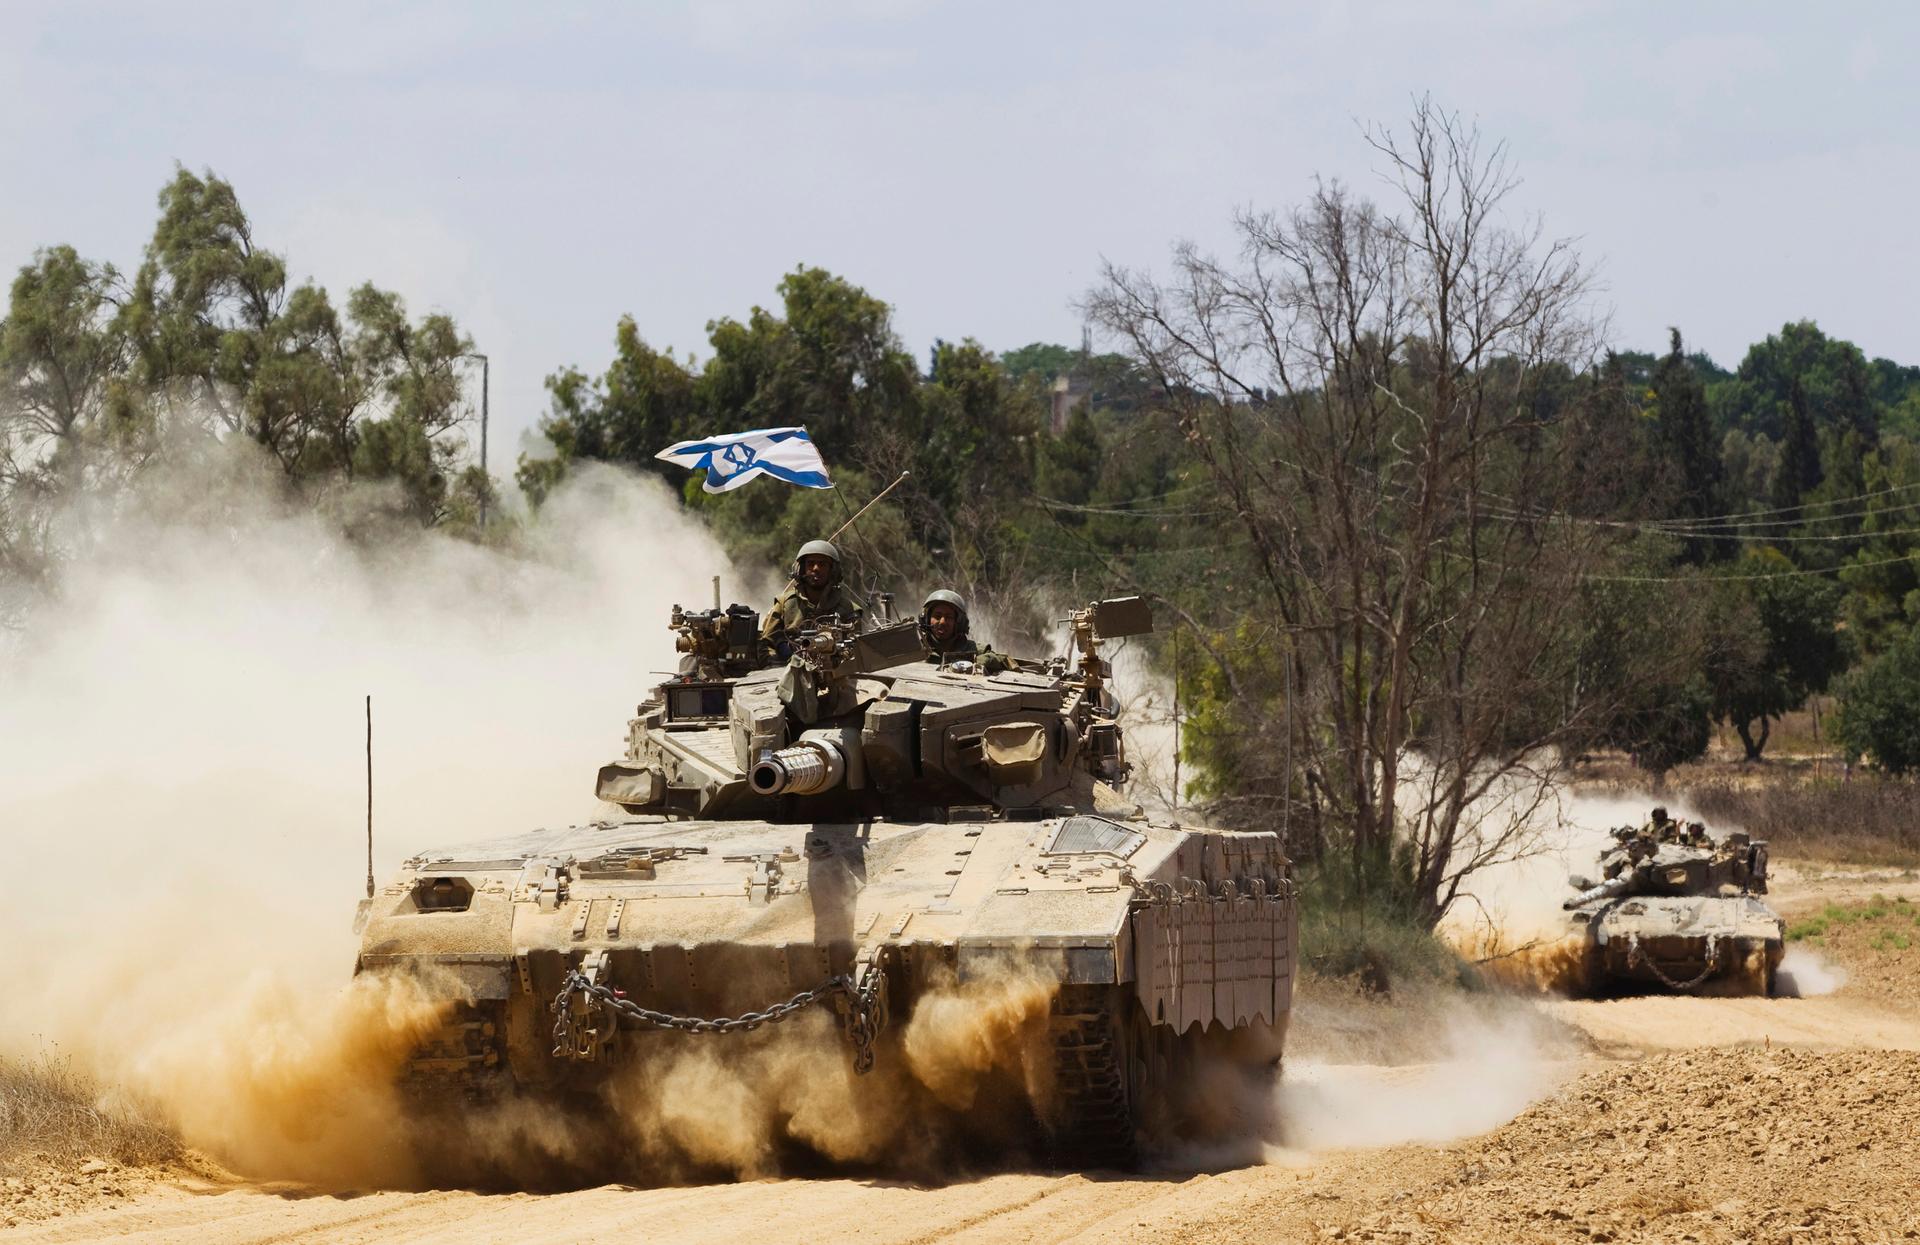 Israeli soldiers travel atop tanks outside the Gaza Strip July 18, 2014. Israel stepped up its land offensive in Gaza with artillery, tanks and gunboats on Friday and declared it could "significantly widen" an operation Palestinian officials said was kill